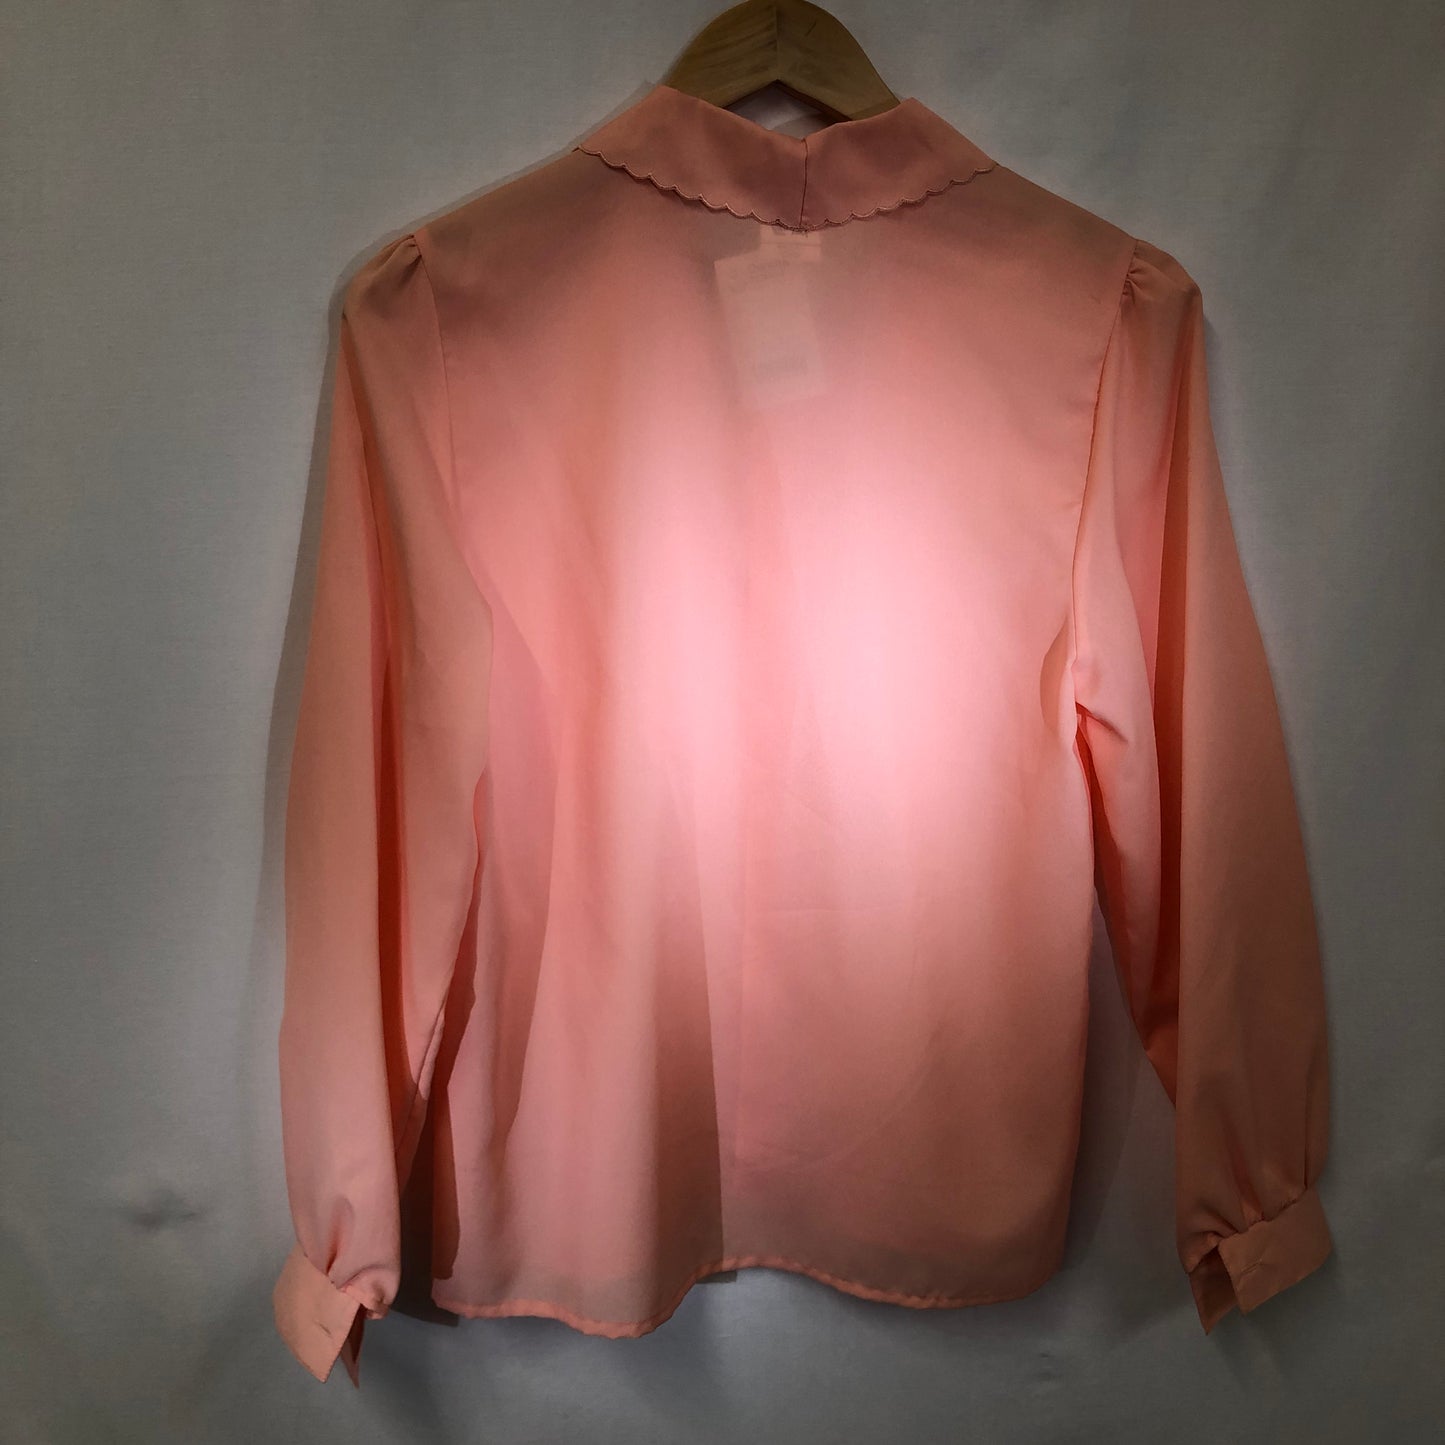 Vintage Peach Blouse With Bow Embroidery Size 10